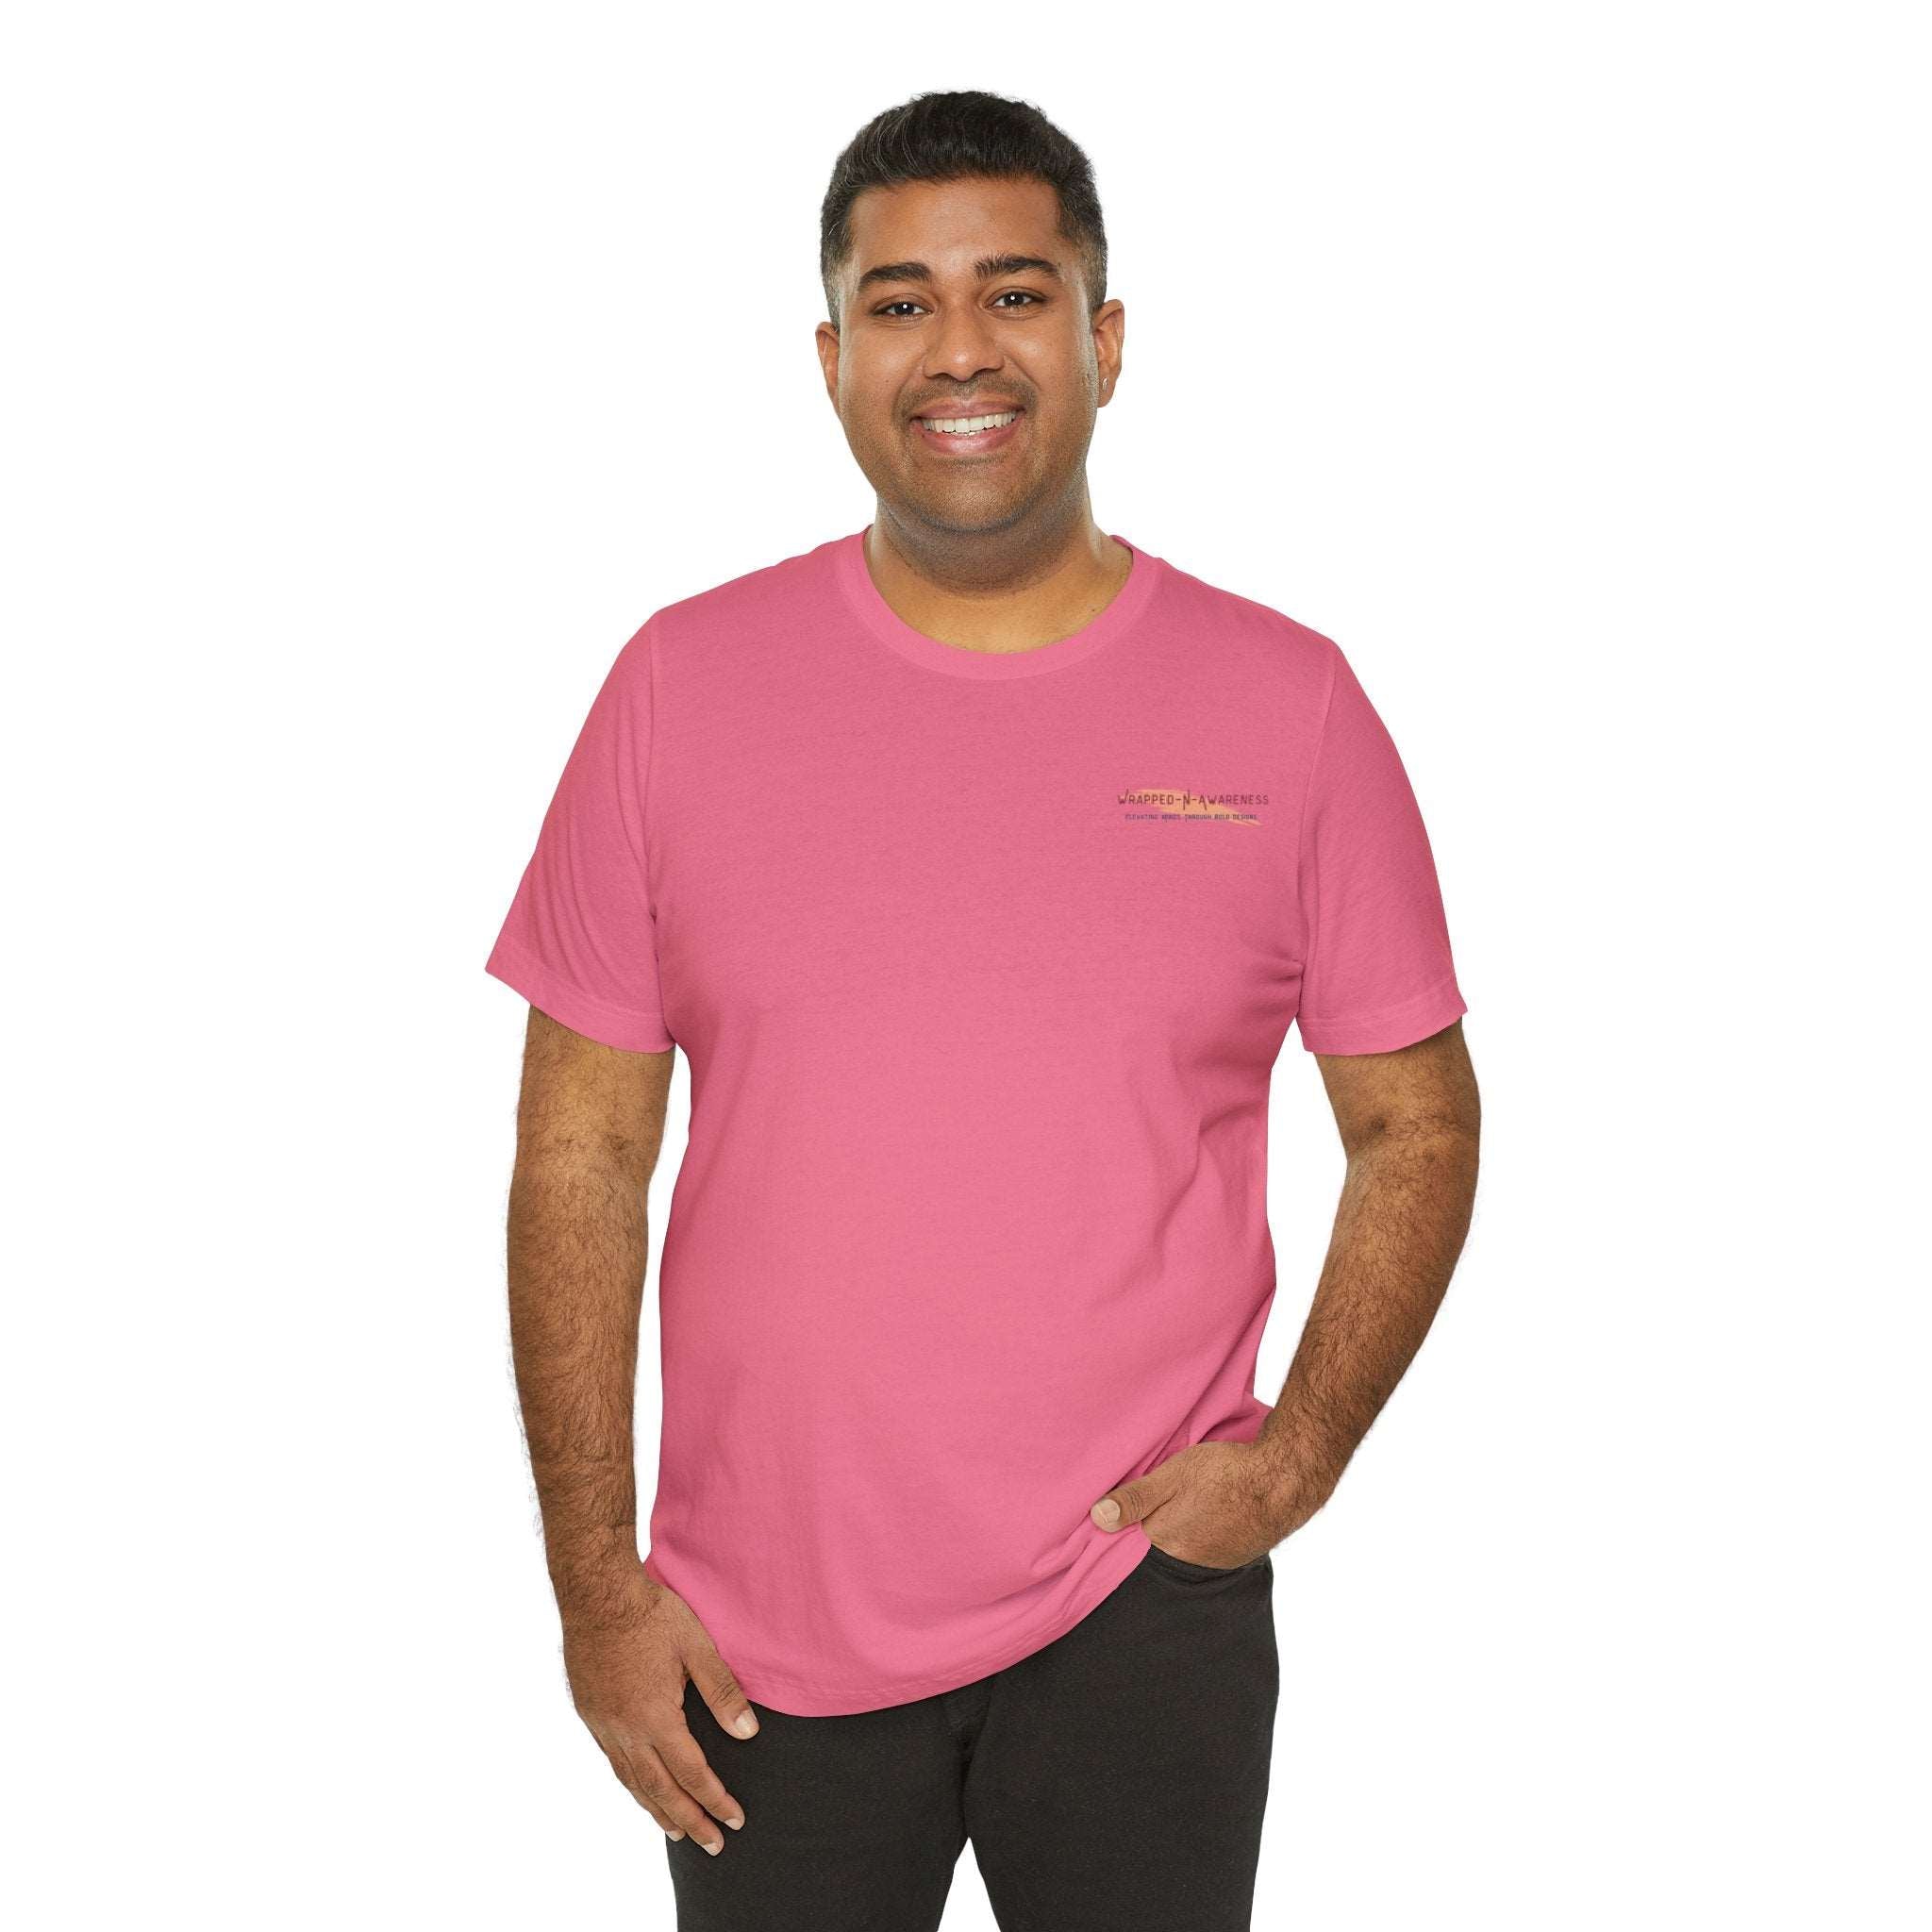 Brave Blossoms Jersey Tee - Bella+Canvas 3001 Charity Pink Classic Tee Comfortable Tee Cotton T-Shirt Graphic Tee JerseyTee Statement Shirt T-shirt Tee Unisex Apparel T-Shirt 15313111160956690637_2048_a081d501-3453-4538-afe5-fd25aef14423 Printify